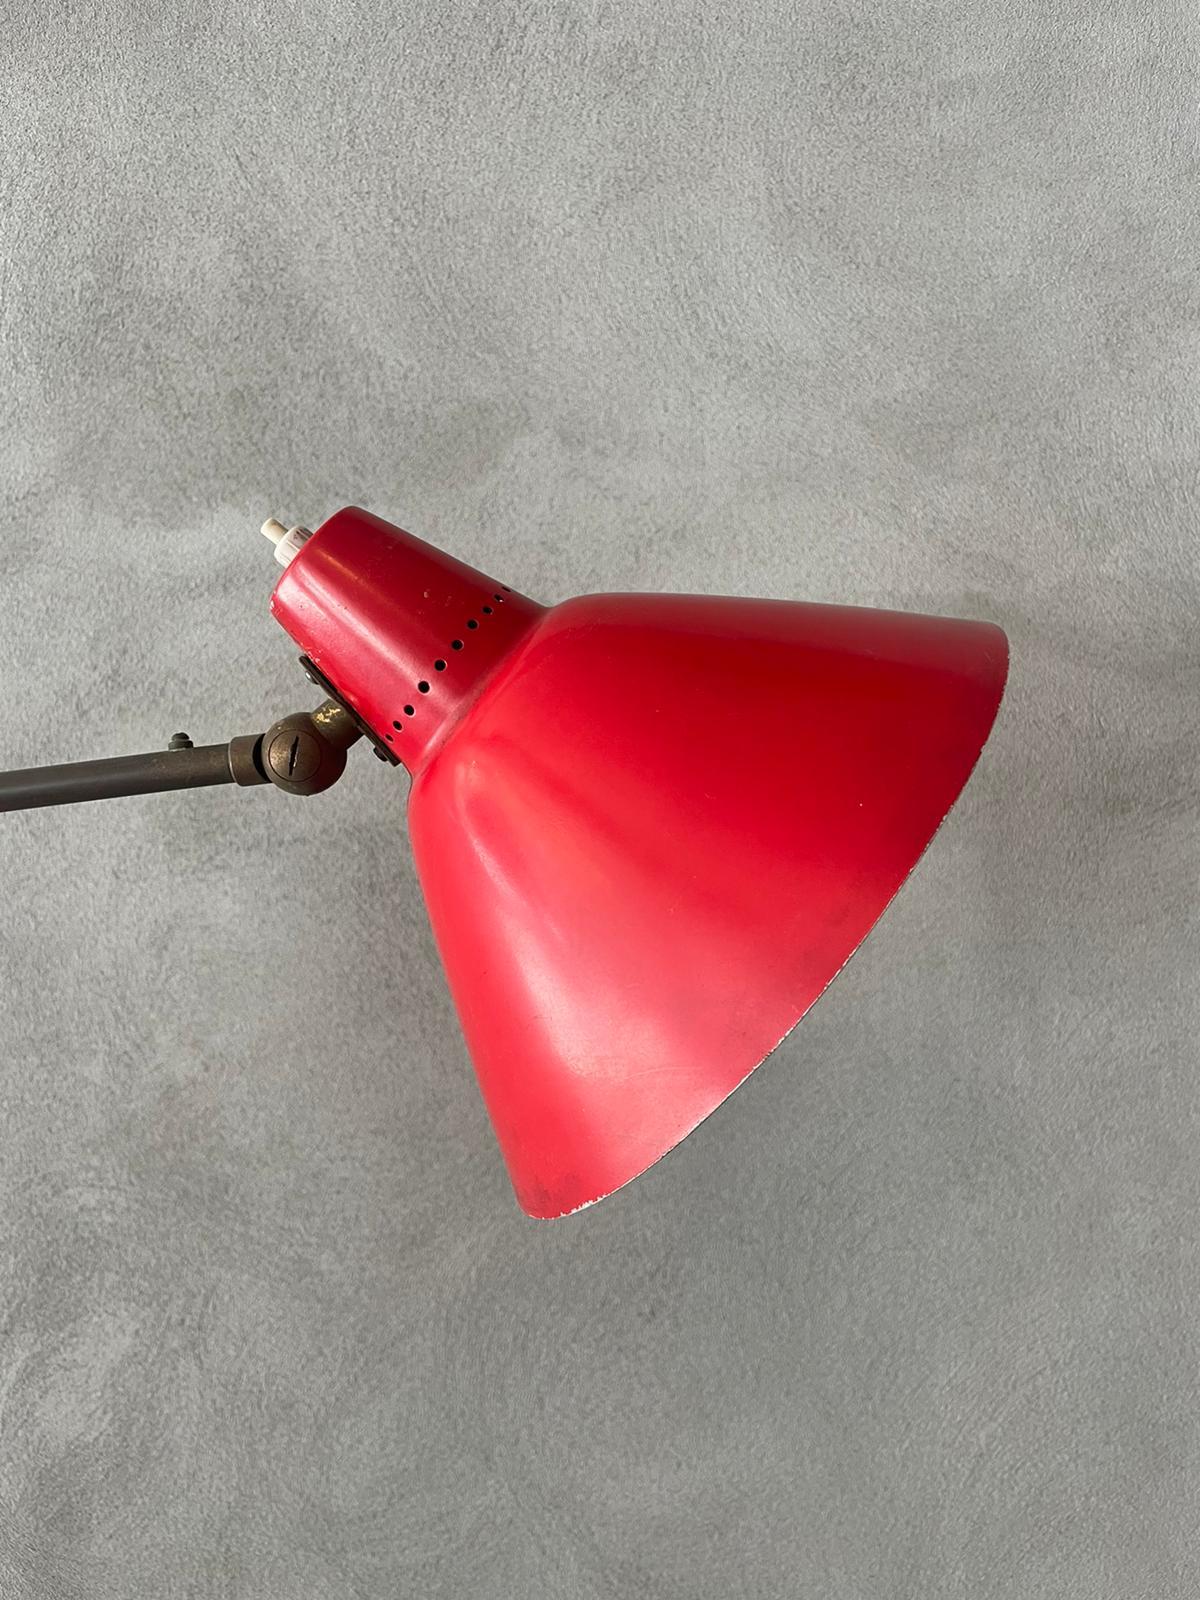 Mid-Century Modern Stilnovo Floor Lamp White and Red Metal Lampshades Brass Marble, Italy, 1955 For Sale